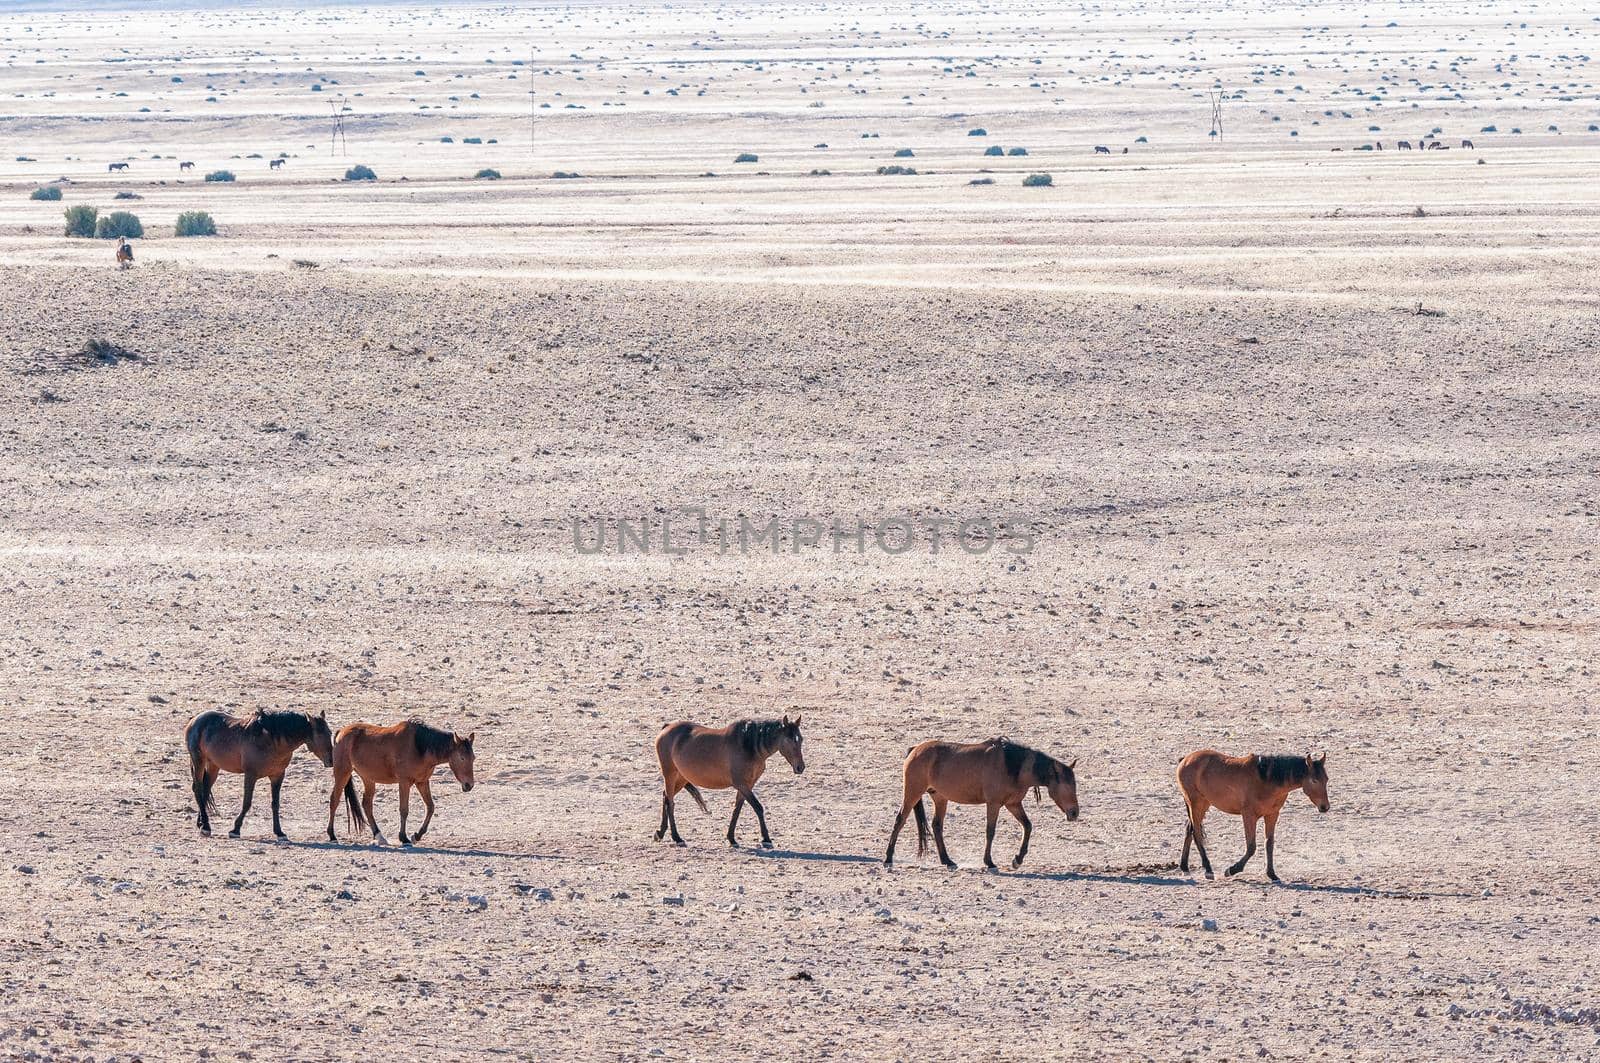 Wild horses of the Namib walking in a row by dpreezg